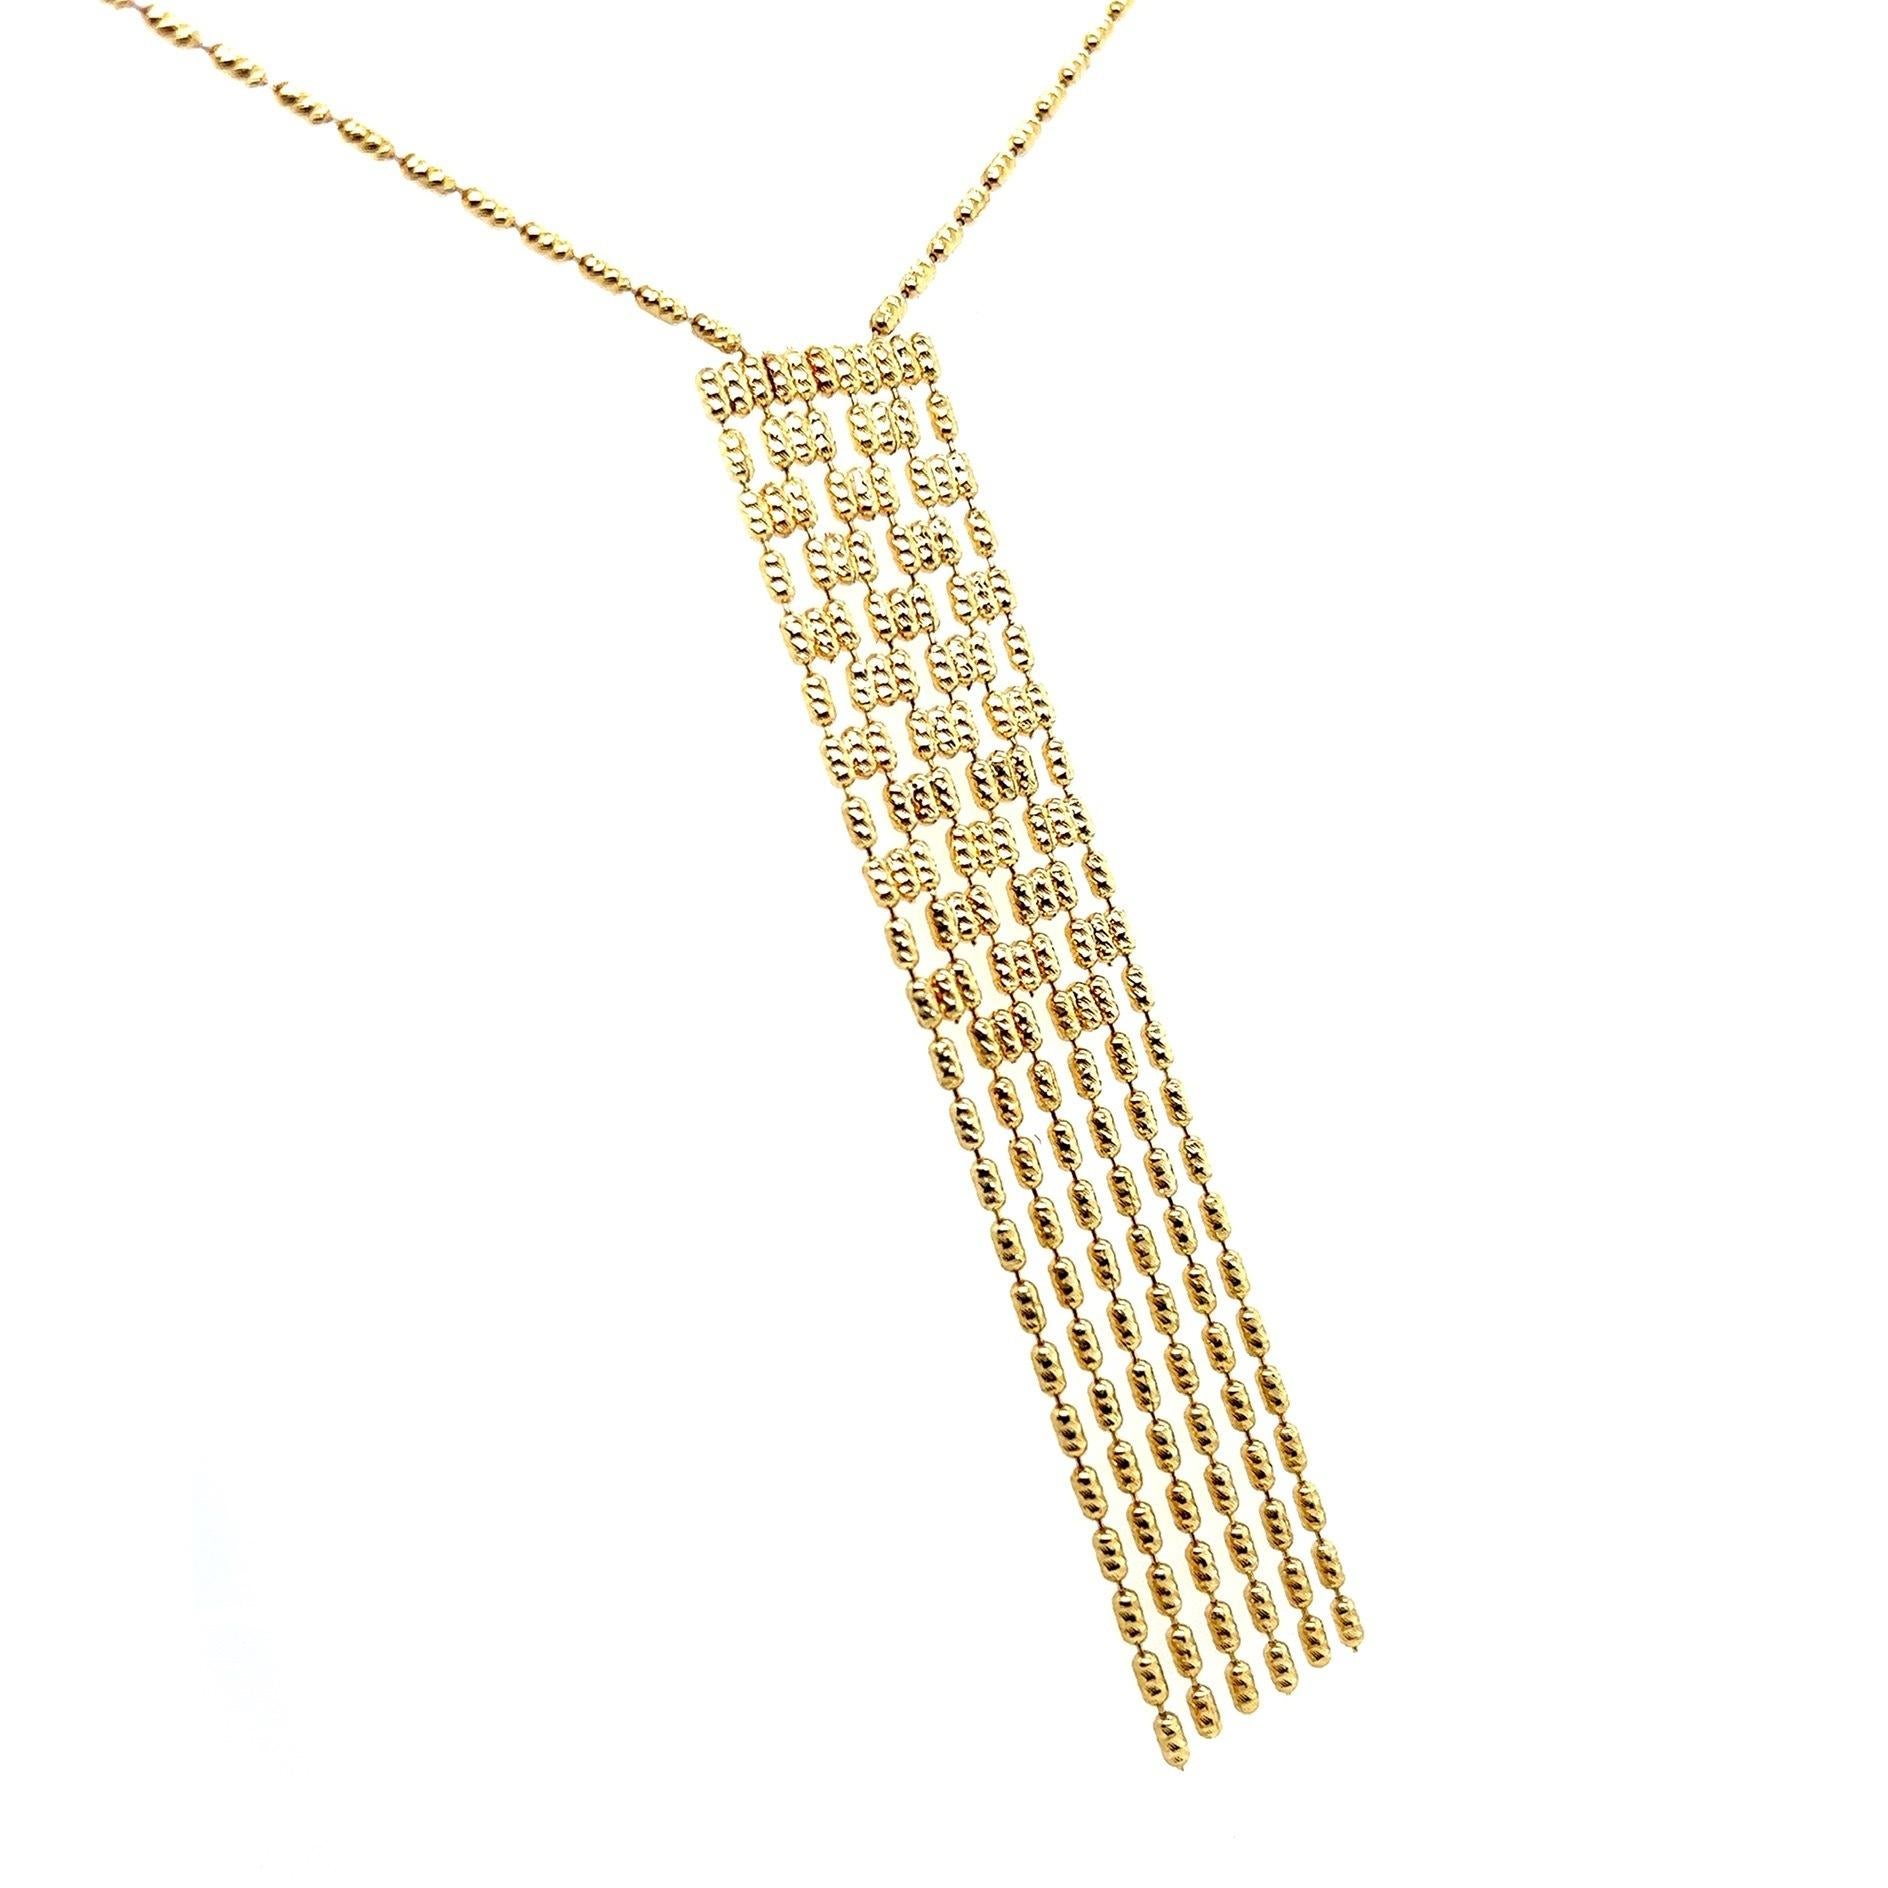 Simply Beautiful! Finely detailed Gold Link Drop Necklace, suspending 6 Gold Link strands, approx. 3” long. The necklace Hand crafted in 14K Yellow Gold measures approx. 20” long. In excellent condition, recently professionally cleaned and polished.